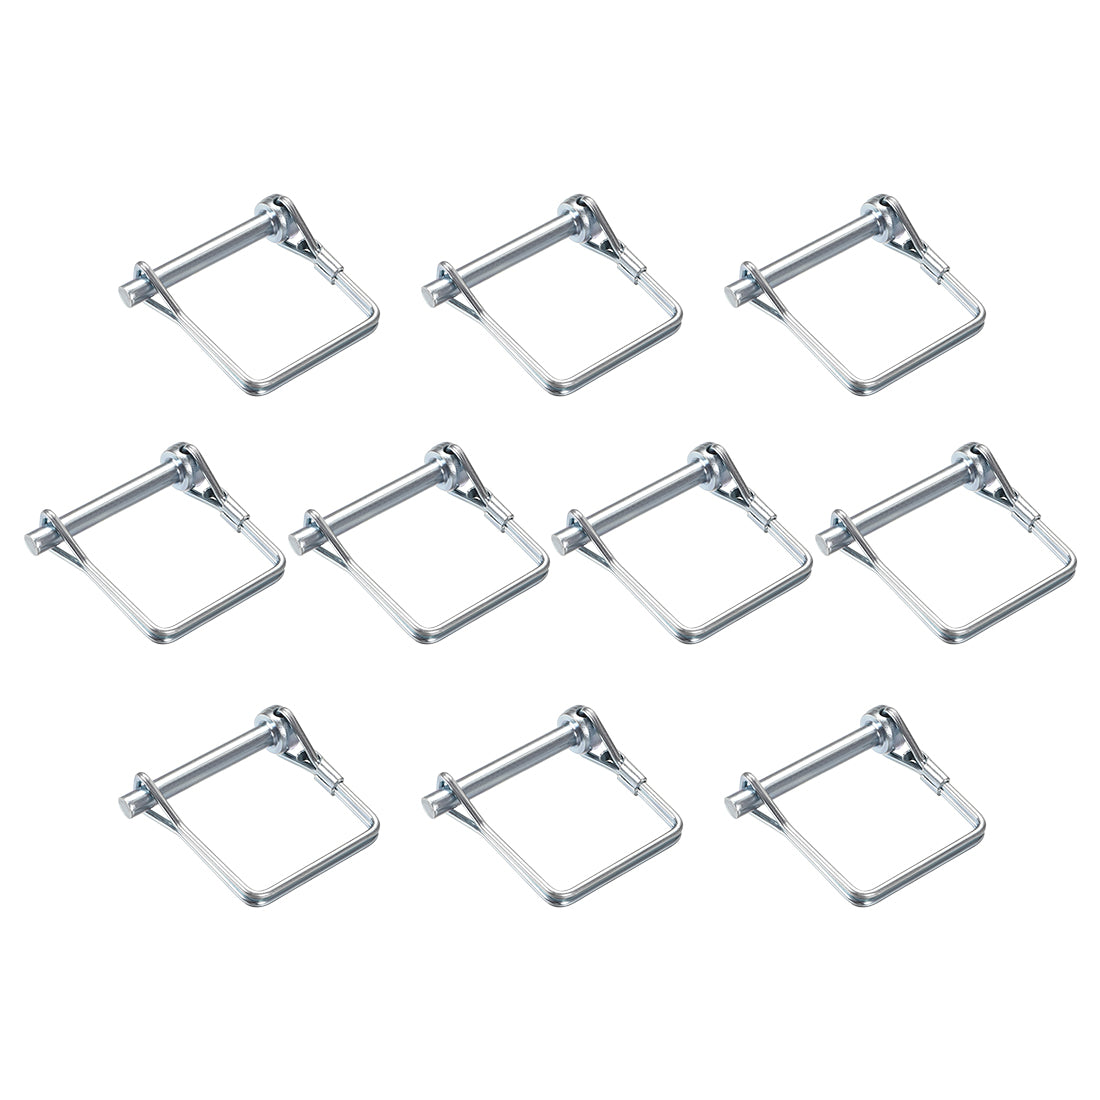 uxcell Uxcell Shaft Locking Pin 6mmx45mm Coupler Pin for Farm Trailers Lawn Square 10Pcs